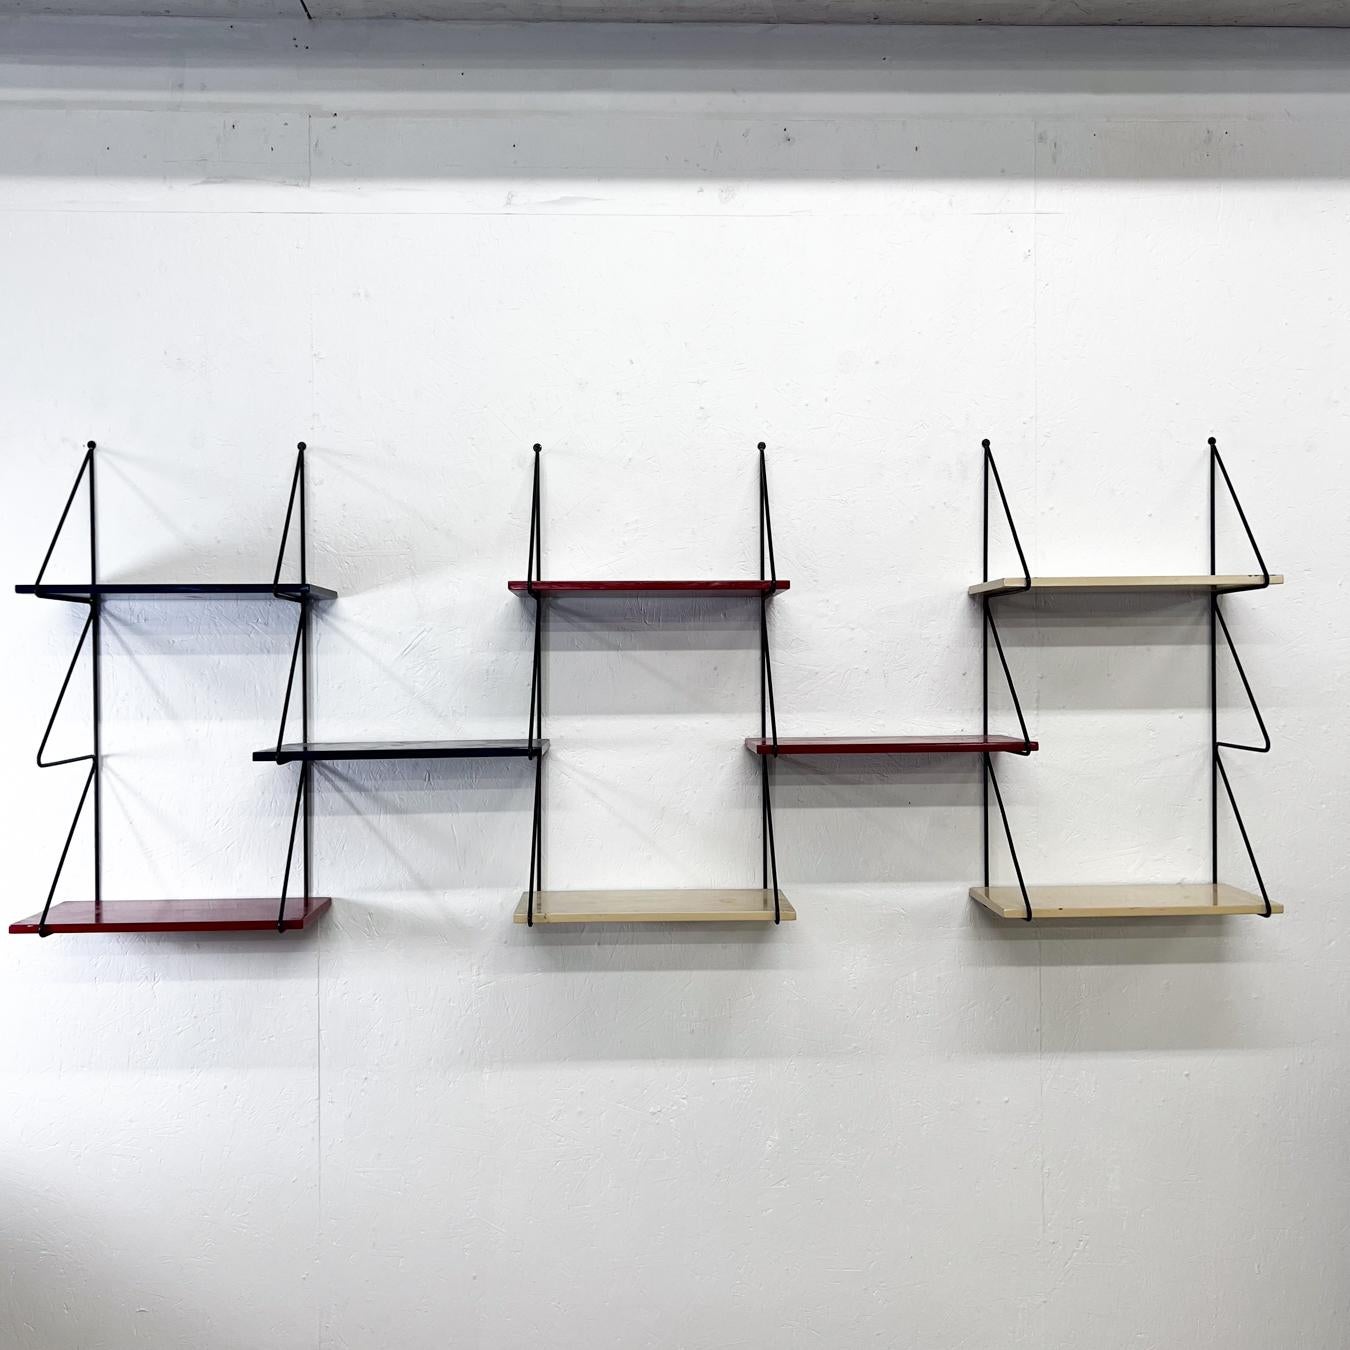 
1960s Jazzy Modern Wall Unit System Eight Shelf Floating Display 
Red, white and black
76.53 w x 30 h 8.38 d
8 shelves
Preowned original vintage condition
See all images please.